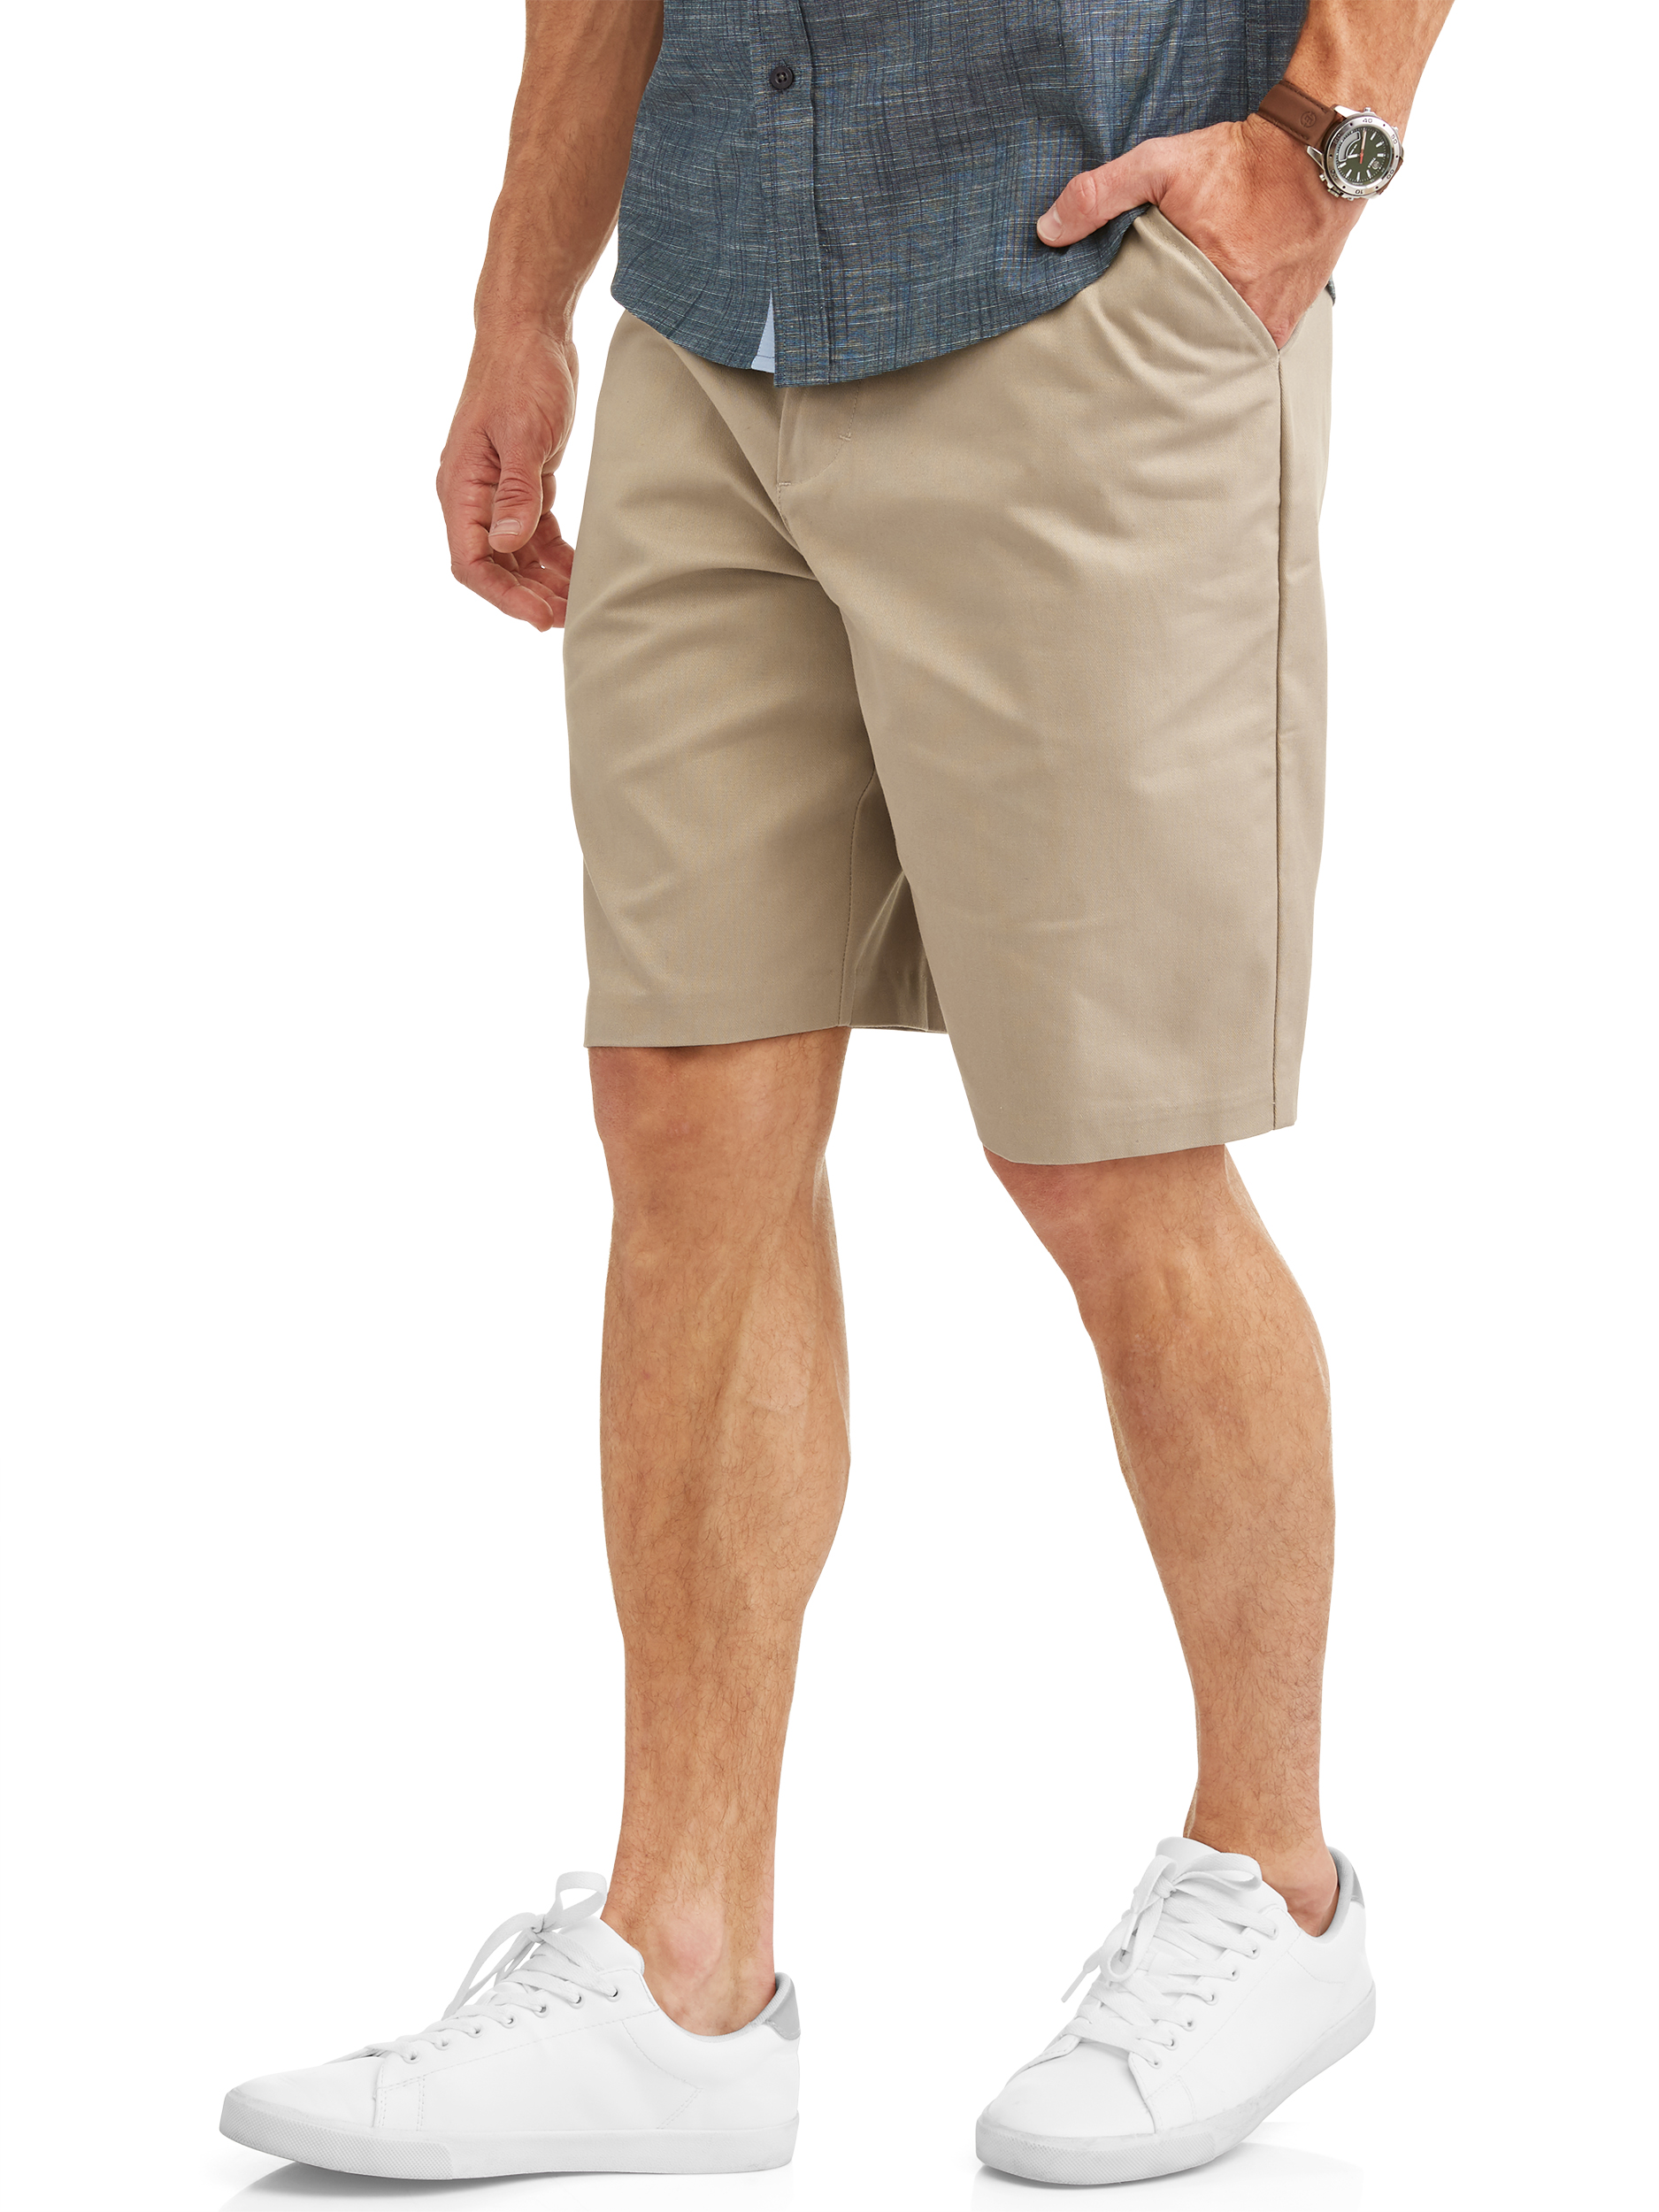 Real School Young Men's 10" Flat Front Short - image 4 of 4